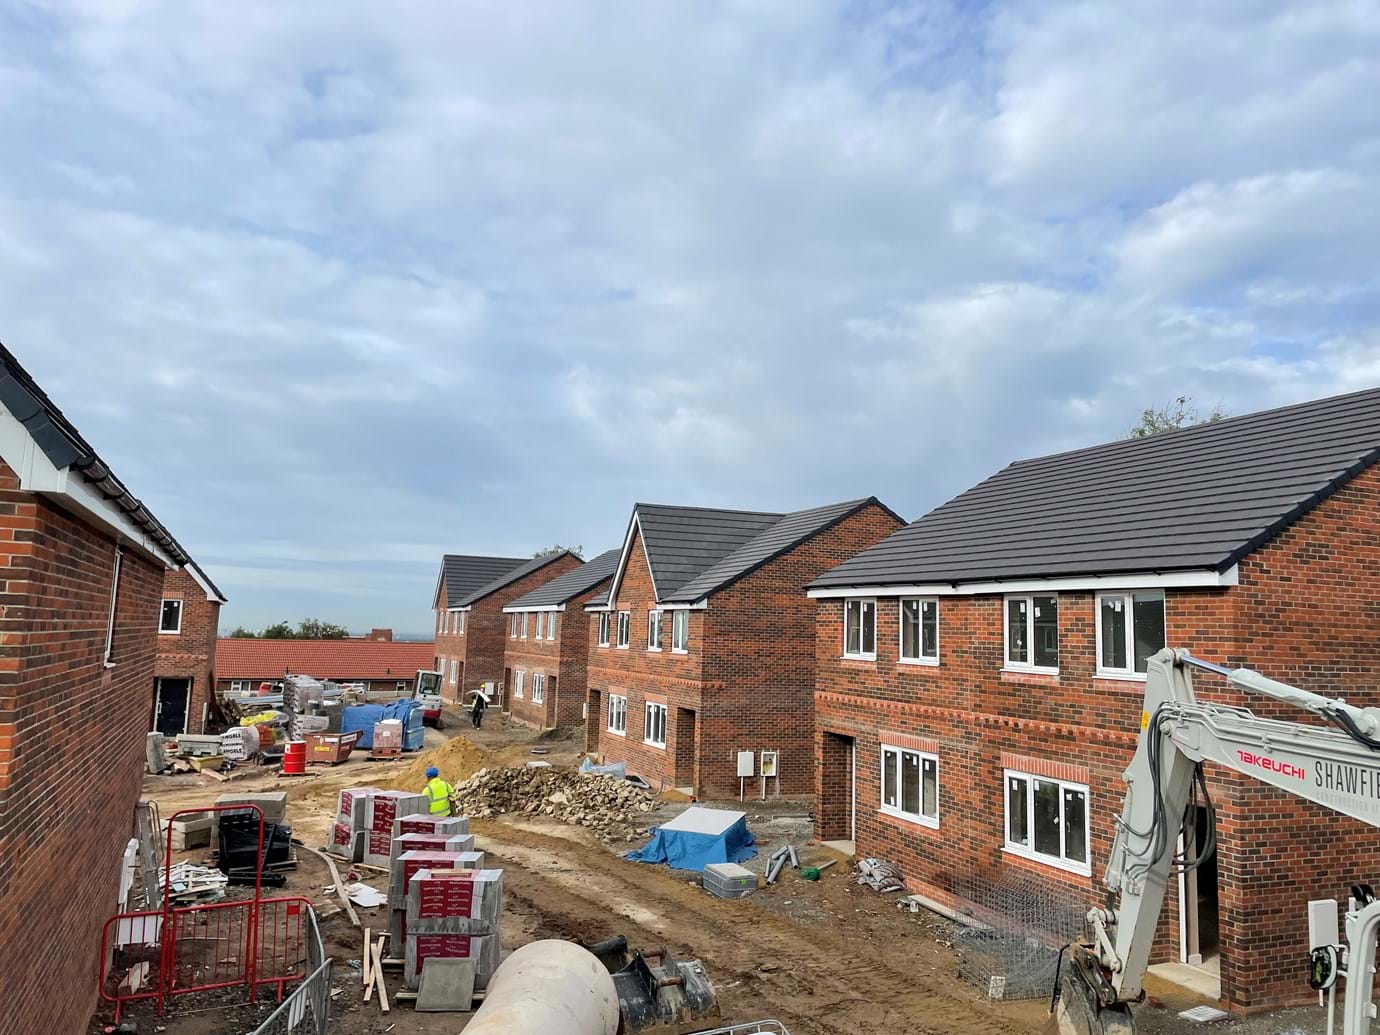 FCHO is working with J Walker Homes, to deliver 24 three bedroom family homes for affordable rent on the site of St Cuthbert's Church at Tanners Fold in Fitton Hill, Oldham